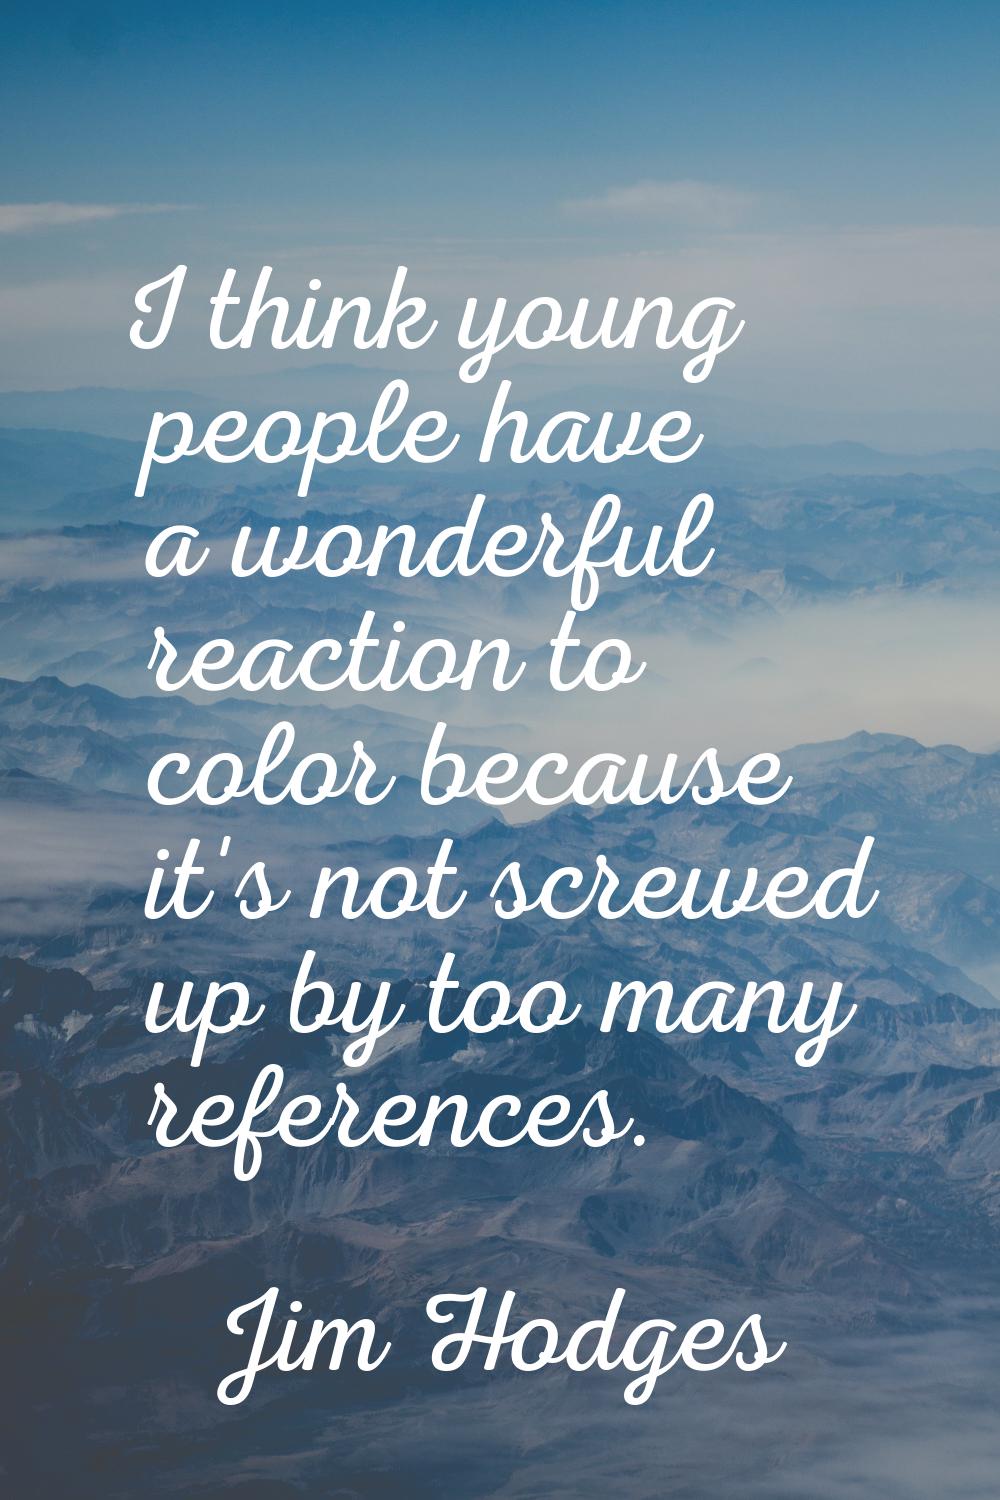 I think young people have a wonderful reaction to color because it's not screwed up by too many ref